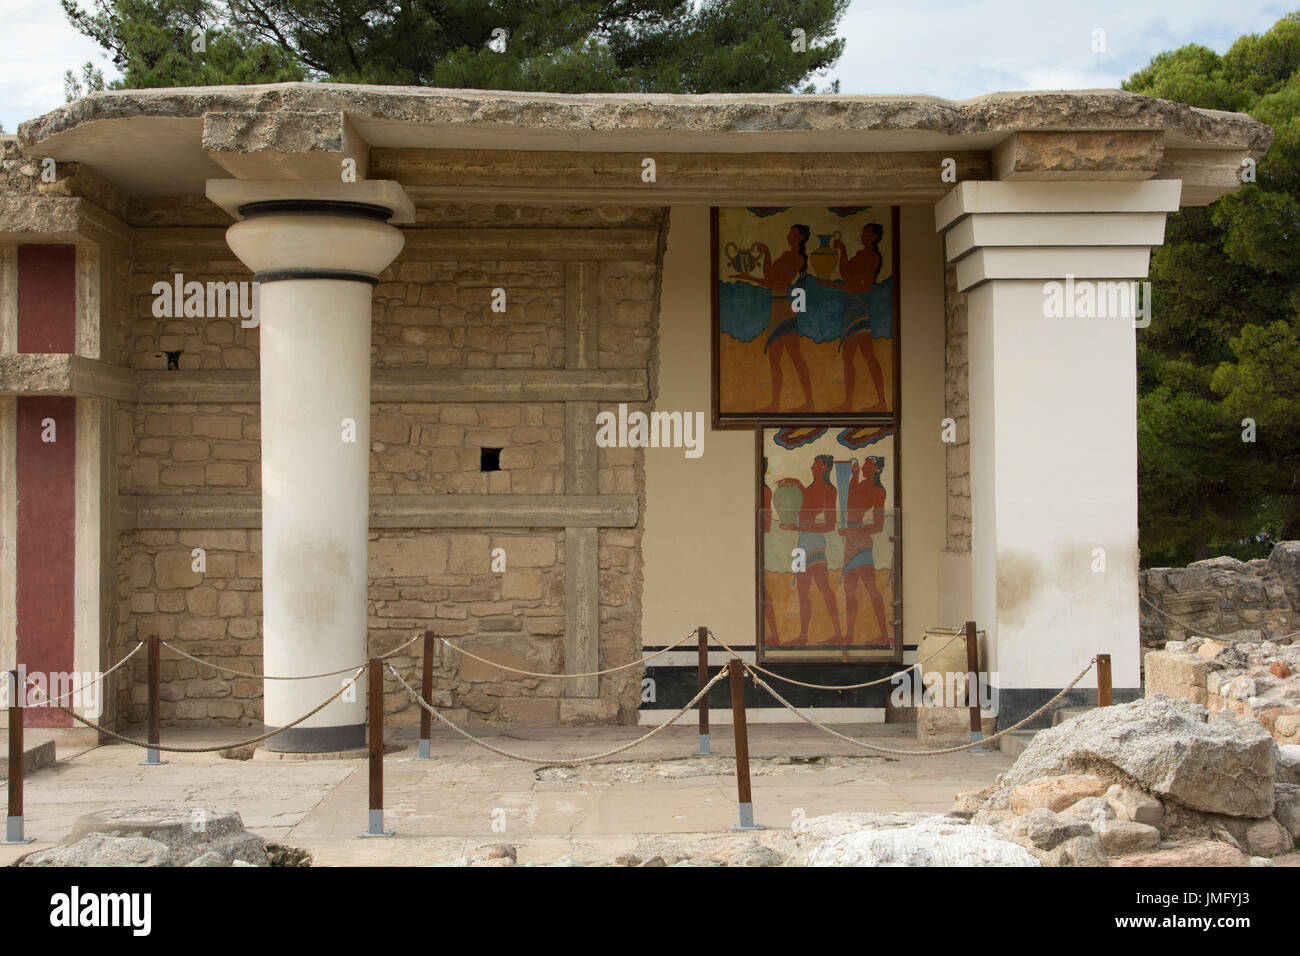 The Palace of Knossos was the ceremonial and political centre of the Minoan civilization and culture.Many frescoes have been excavated there. Stock Photo